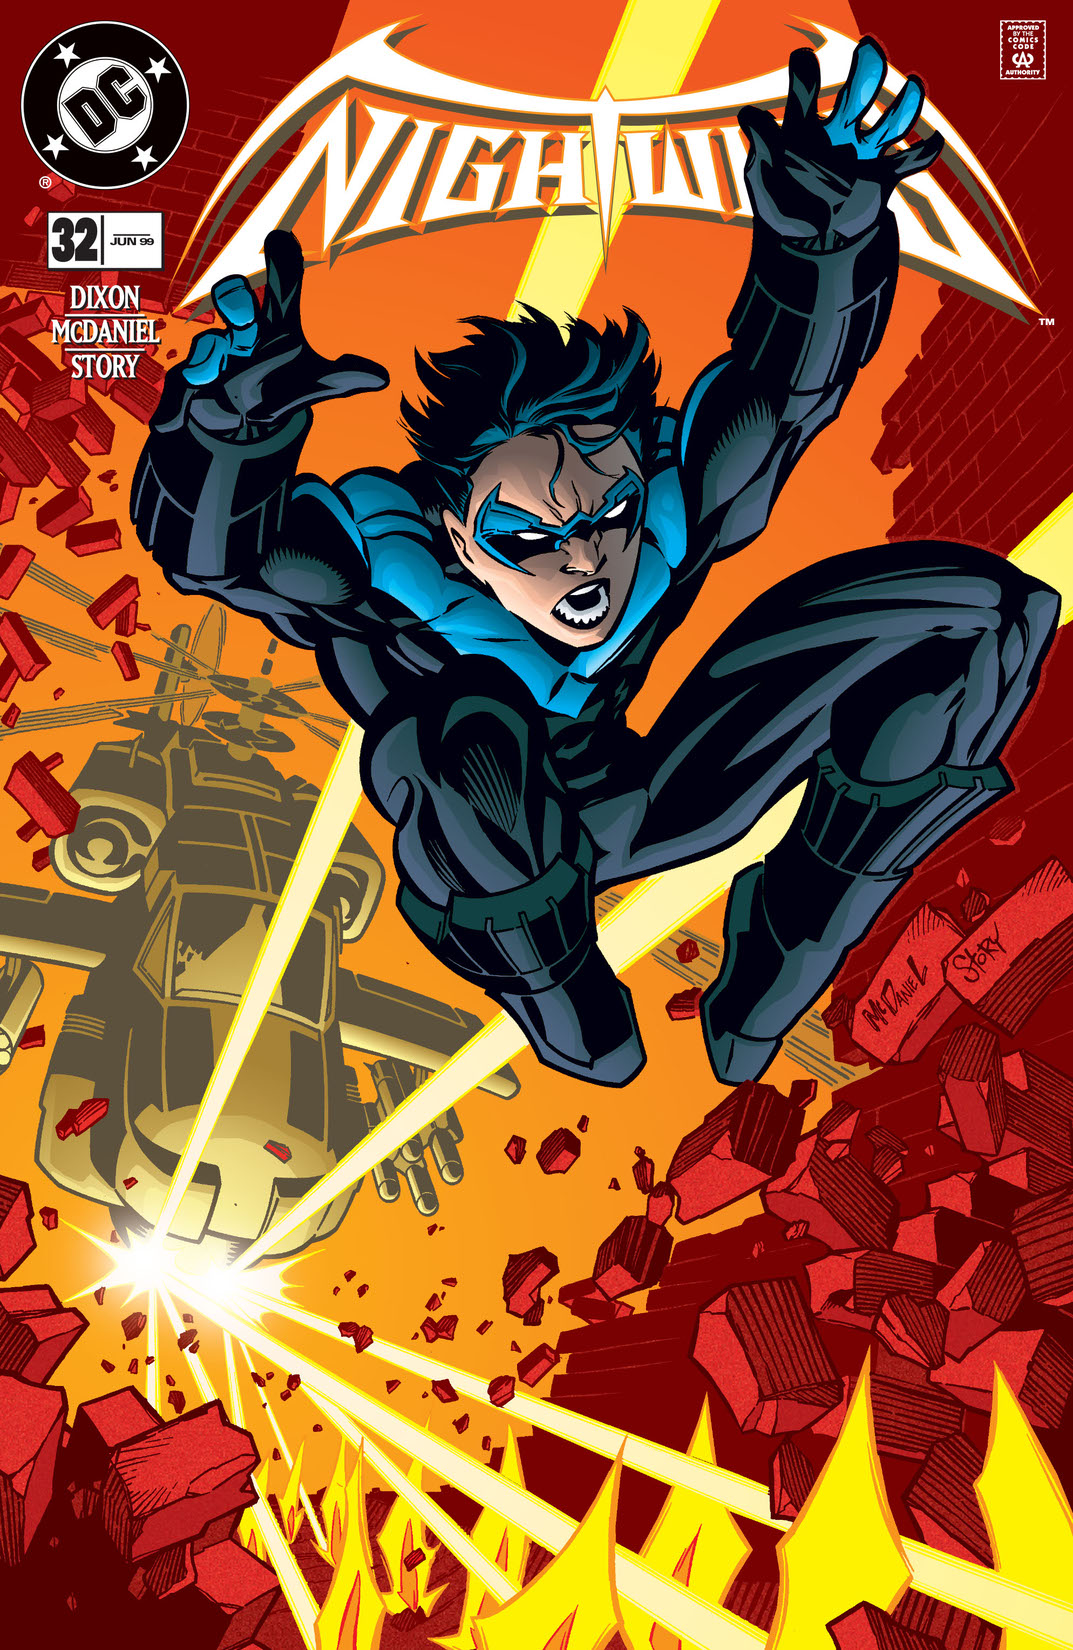 Nightwing (1996-) #32 preview images